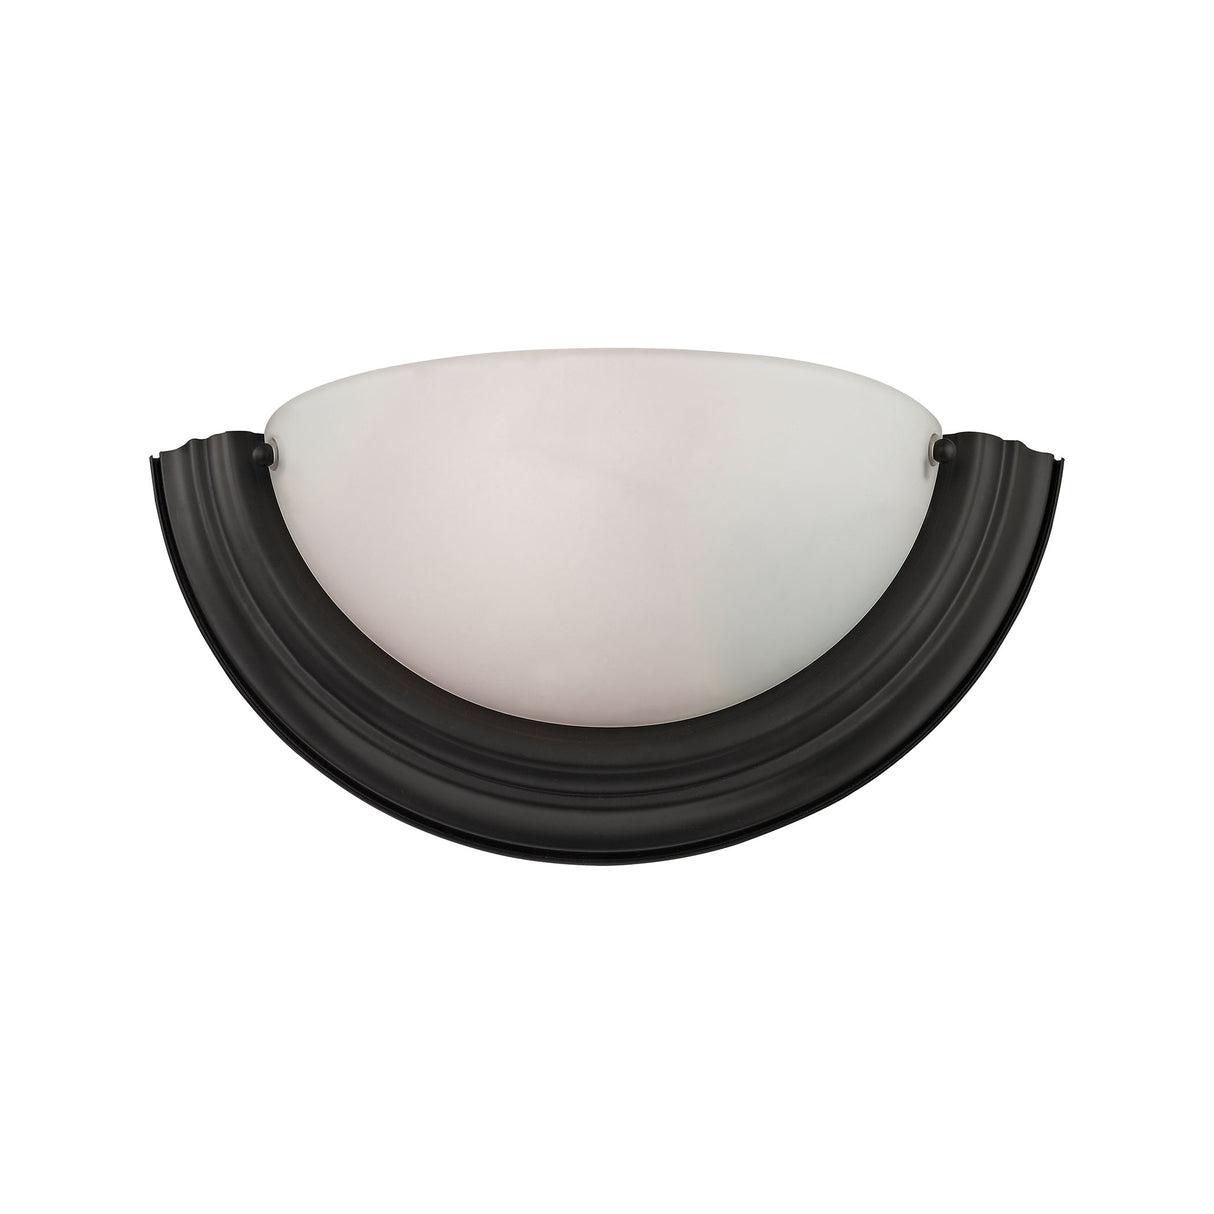 Elk 5151WS/10 1-Light Wall Sconce in OILED RUBBED BRONZE with White Glass